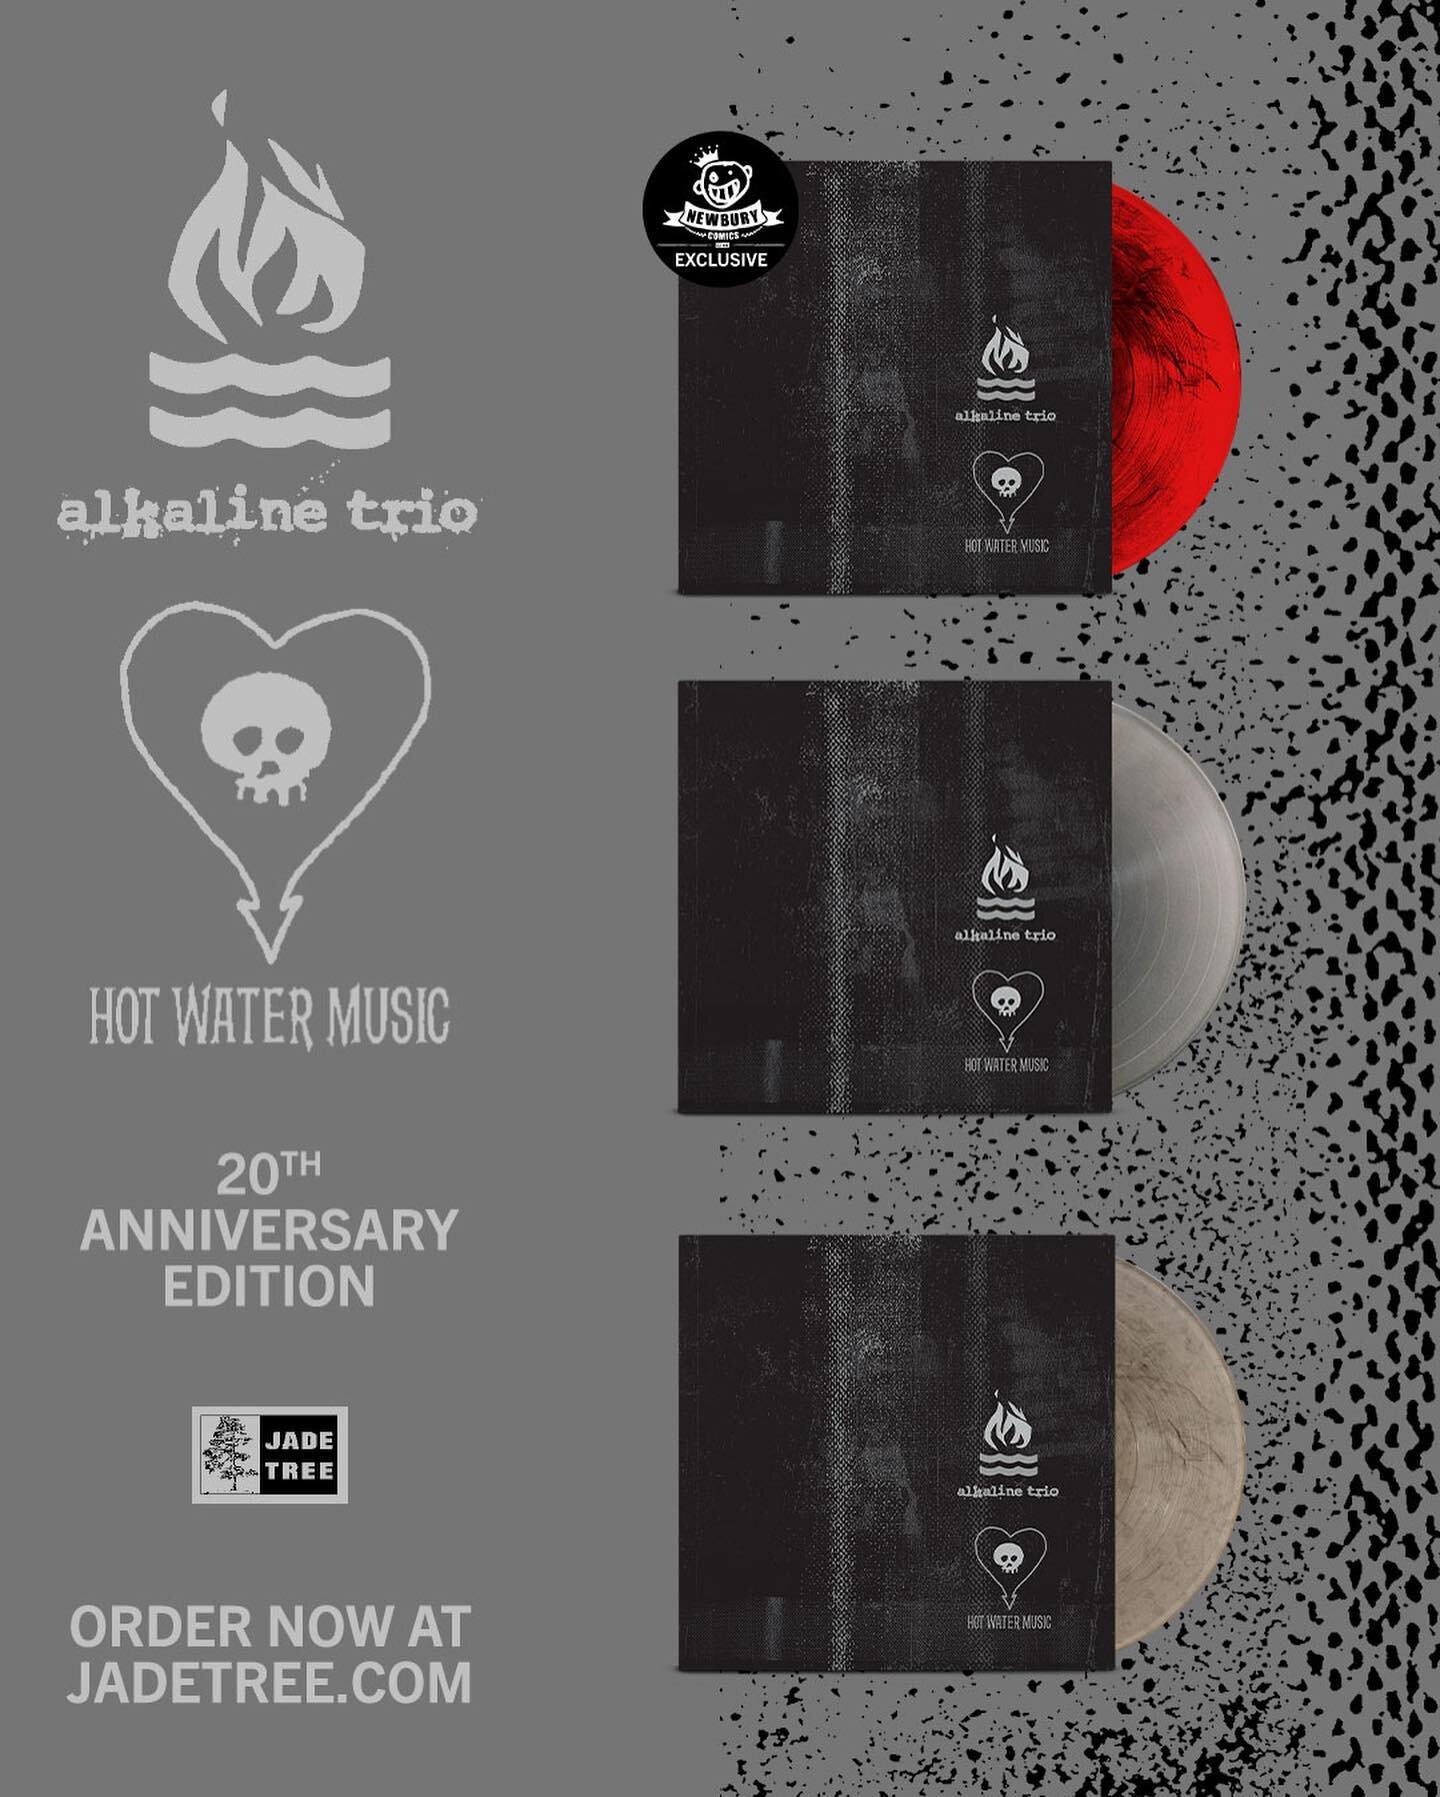 Head's up, the 20th anniversary vinyl re-issue of @Alkaline_Trio x @HotWaterMusicofficial 'Split' is now available for pre-order! Link in our story and Vinyl Highlight.

#AlkalineTrio #HotWaterMusic #Vinyl #NowSpinning #MusicMonday #JadeTree